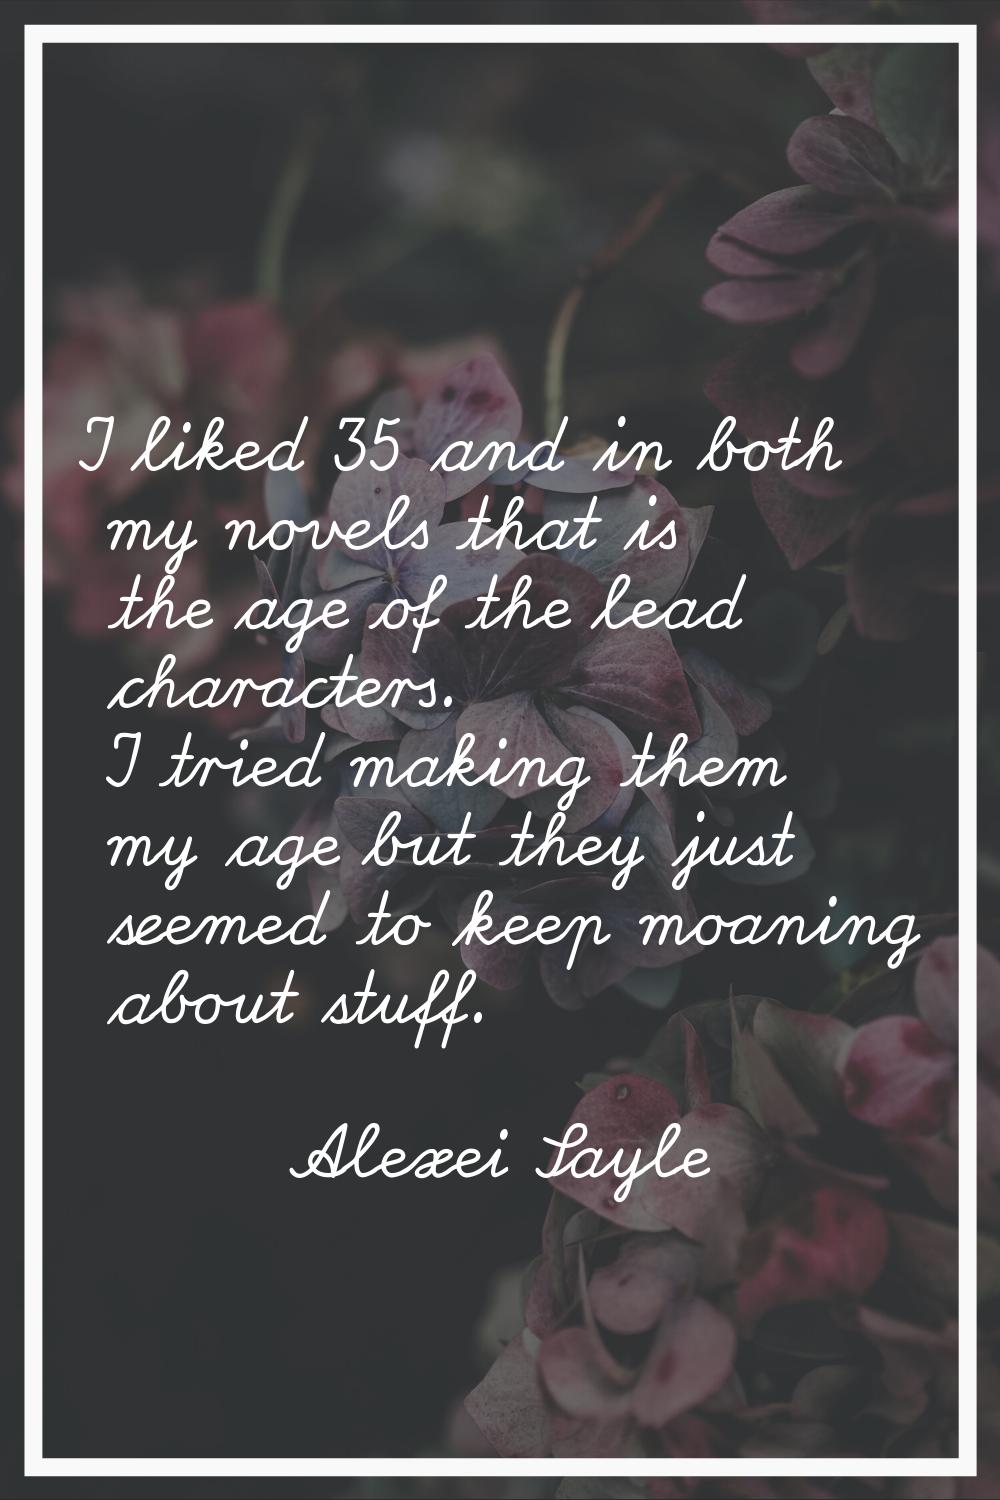 I liked 35 and in both my novels that is the age of the lead characters. I tried making them my age